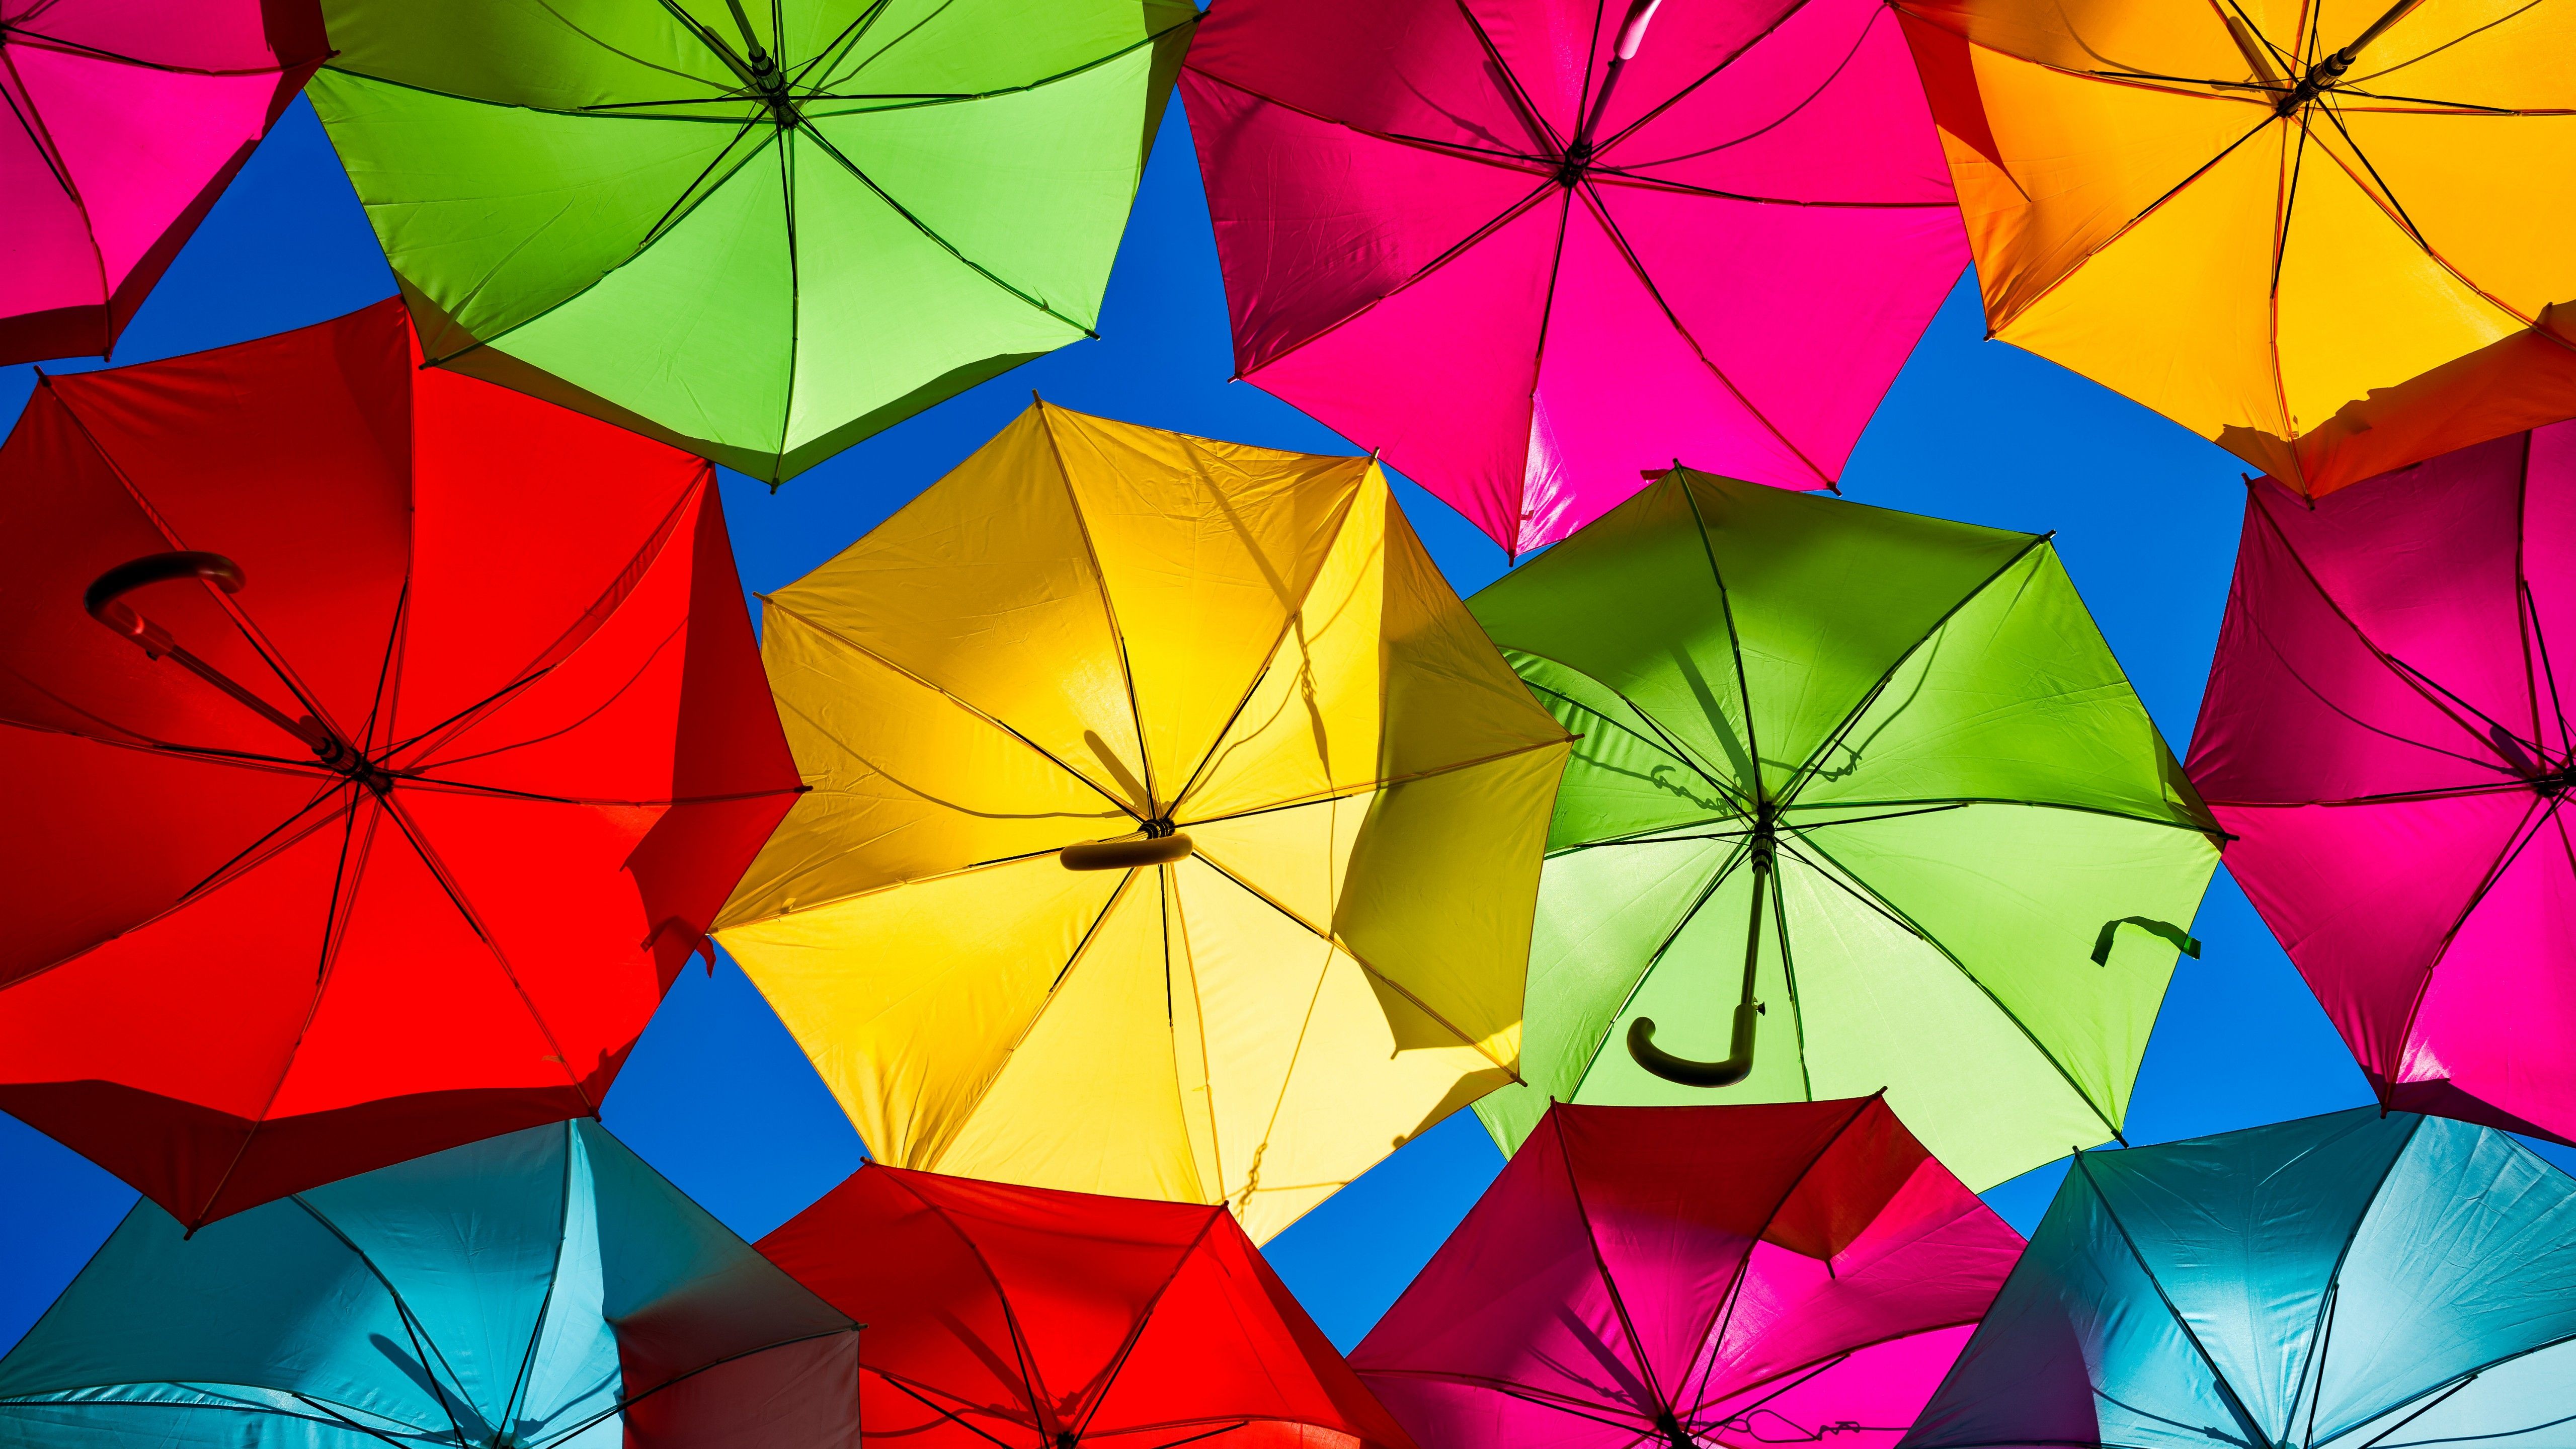 Umbrellas 4K Wallpaper, Street festival, Colorful, Looking up at Sky, Rainbow colors, 5K, Photography